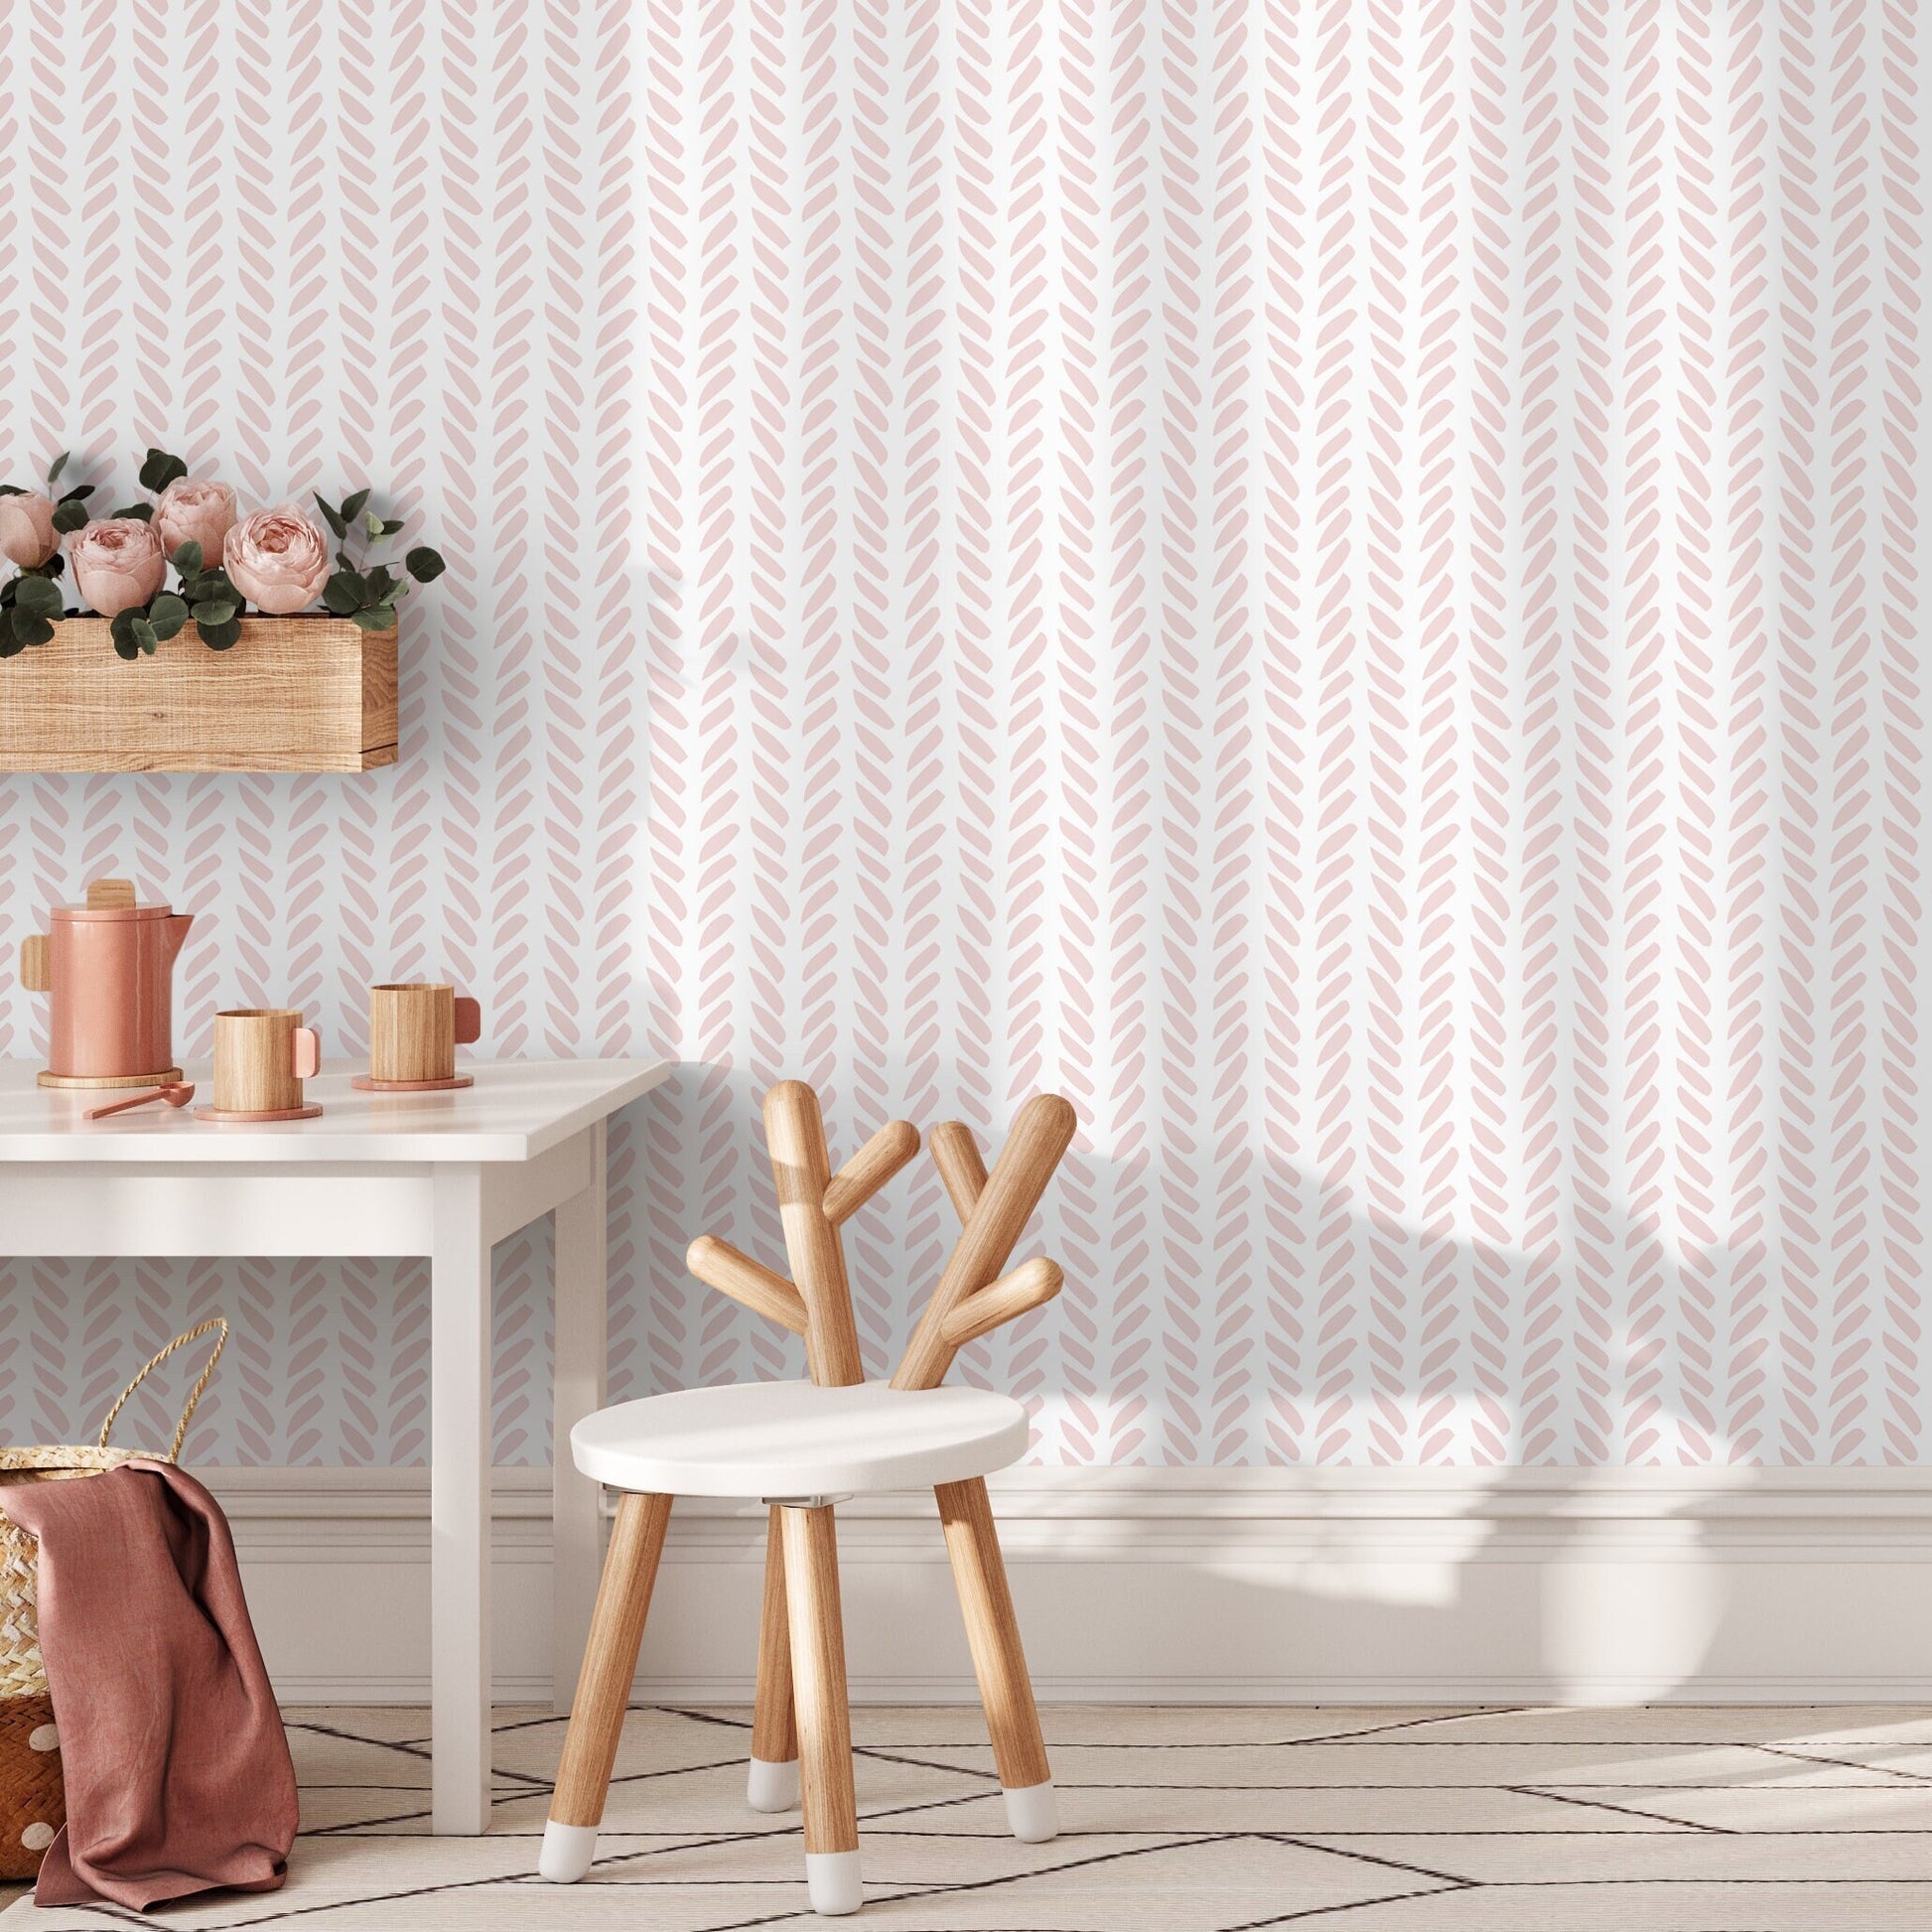 Boho Herringbone in Soft Pink Wallpaper Removable and Repositionable Peel and Stick or Traditional Pre-pasted Wallpaper - ZADB